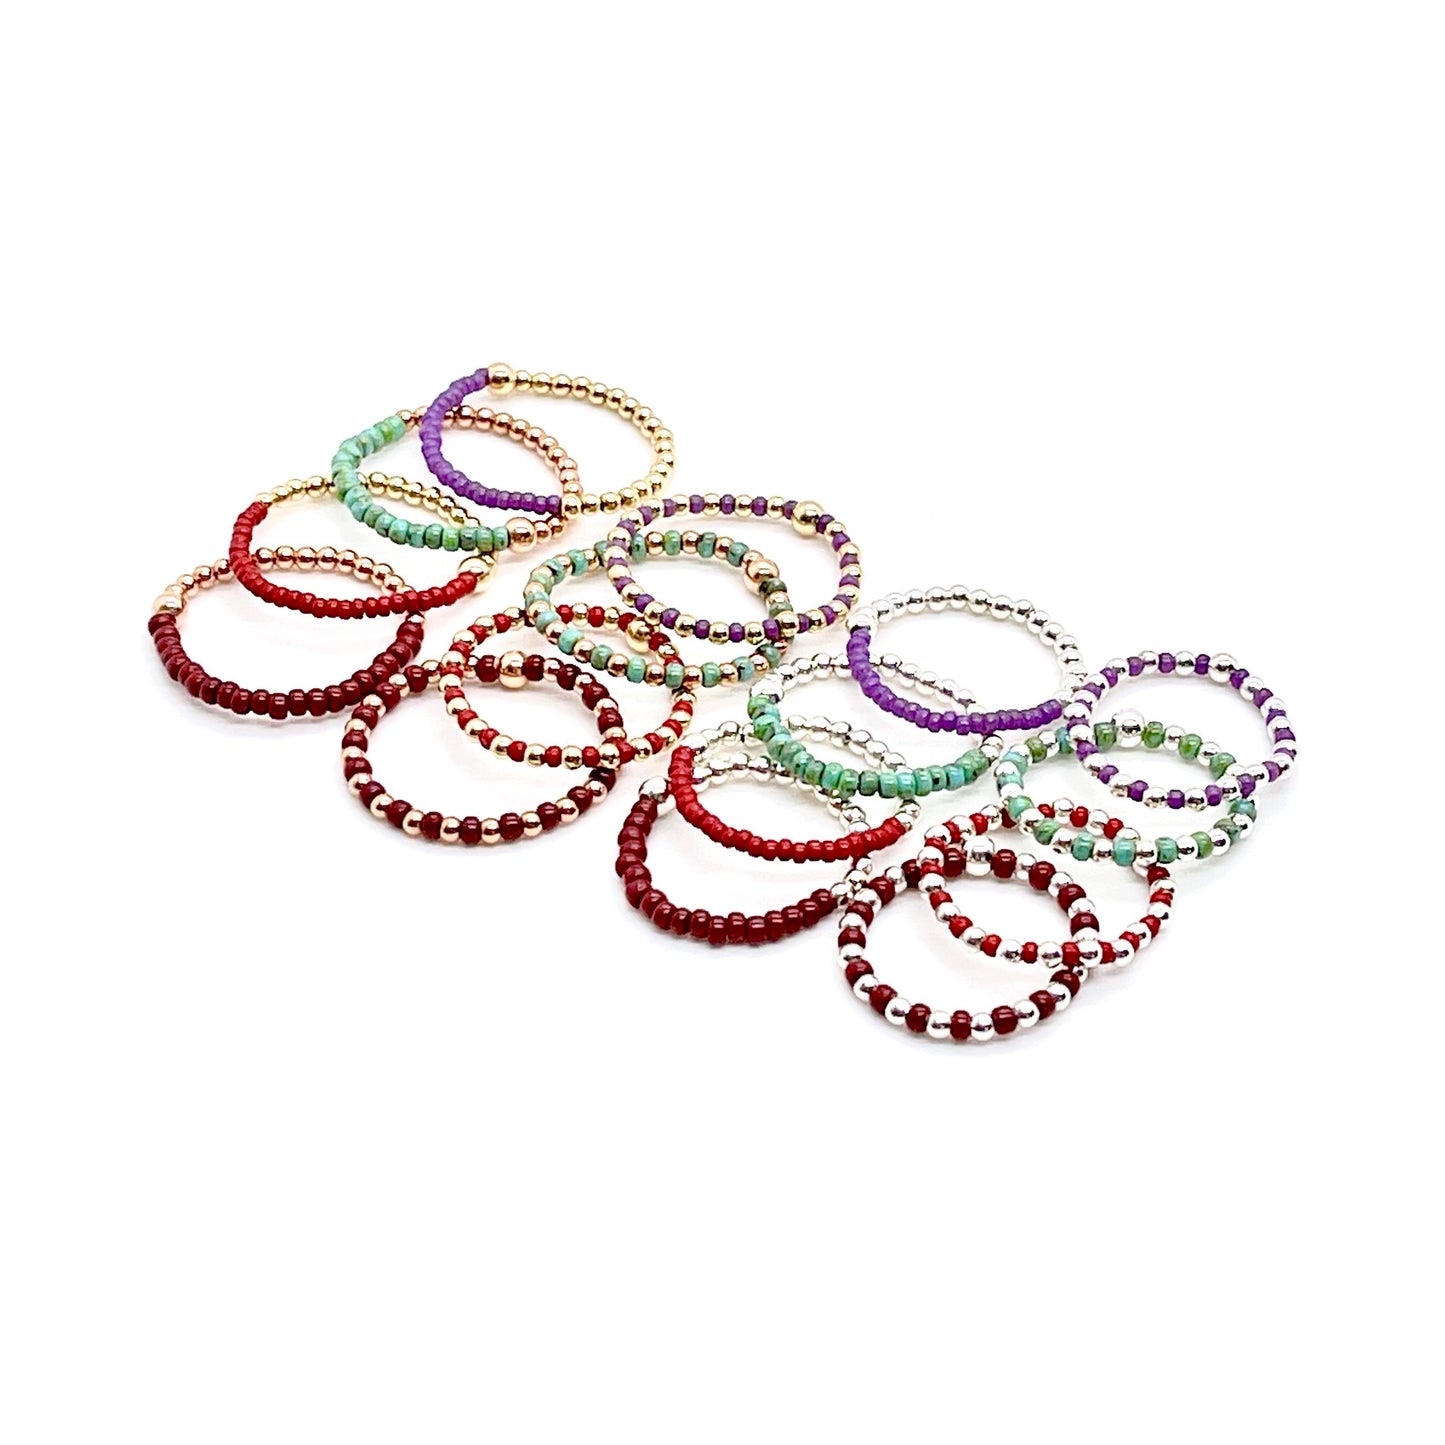 Seed bead stretch ring sets with color blocks and alterating gold fill and sterling silver 2mm ball beads.